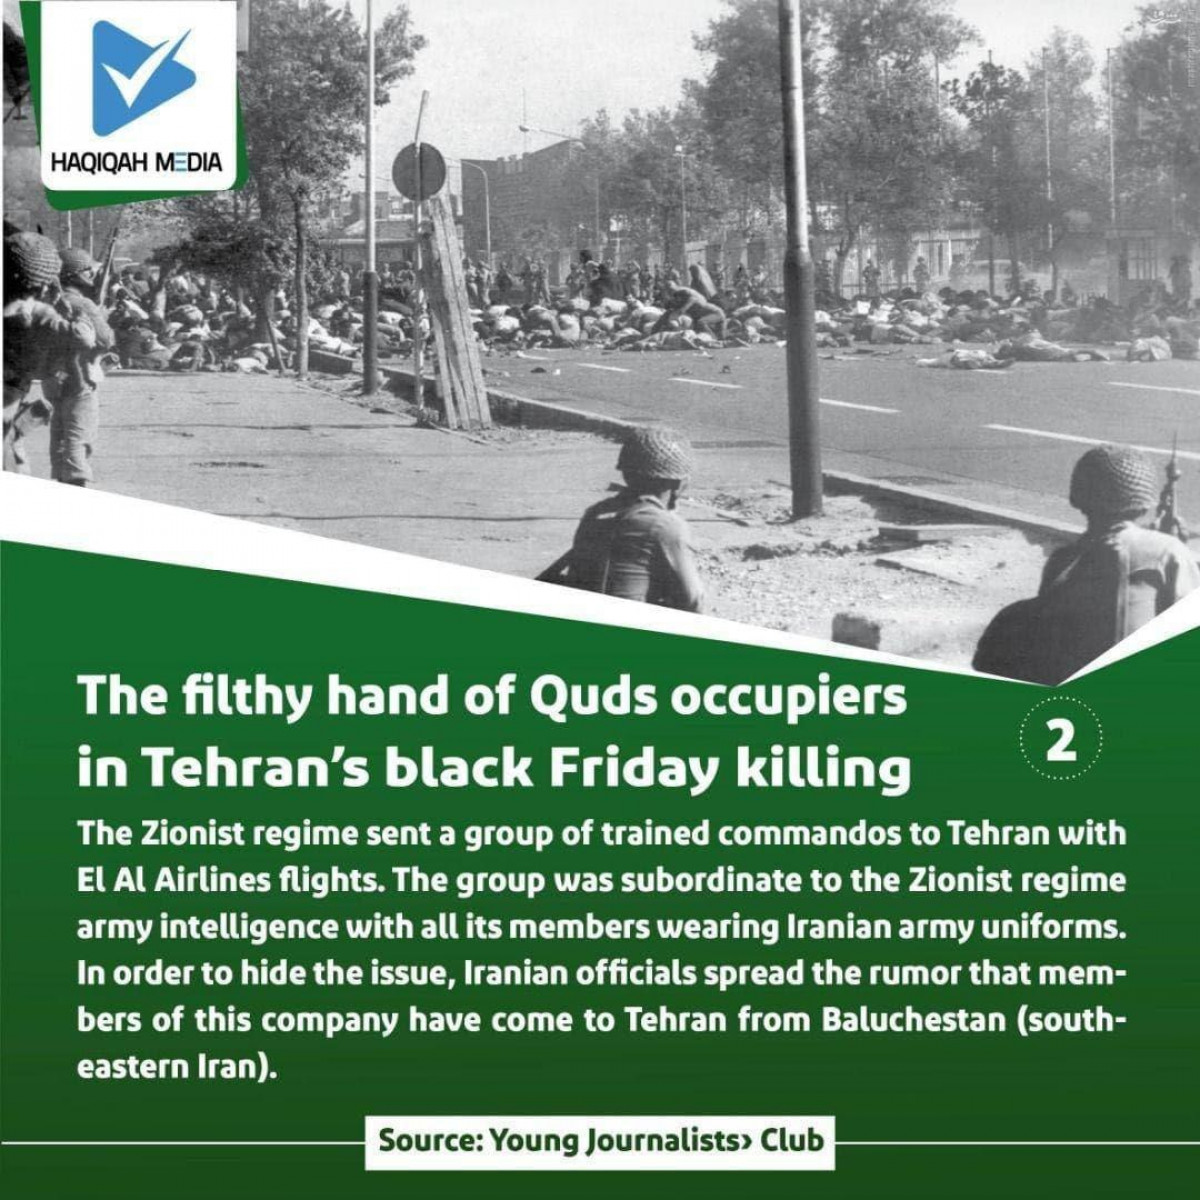 The filthy hand of Quds occupiers in Tehran's black Friday killing 2